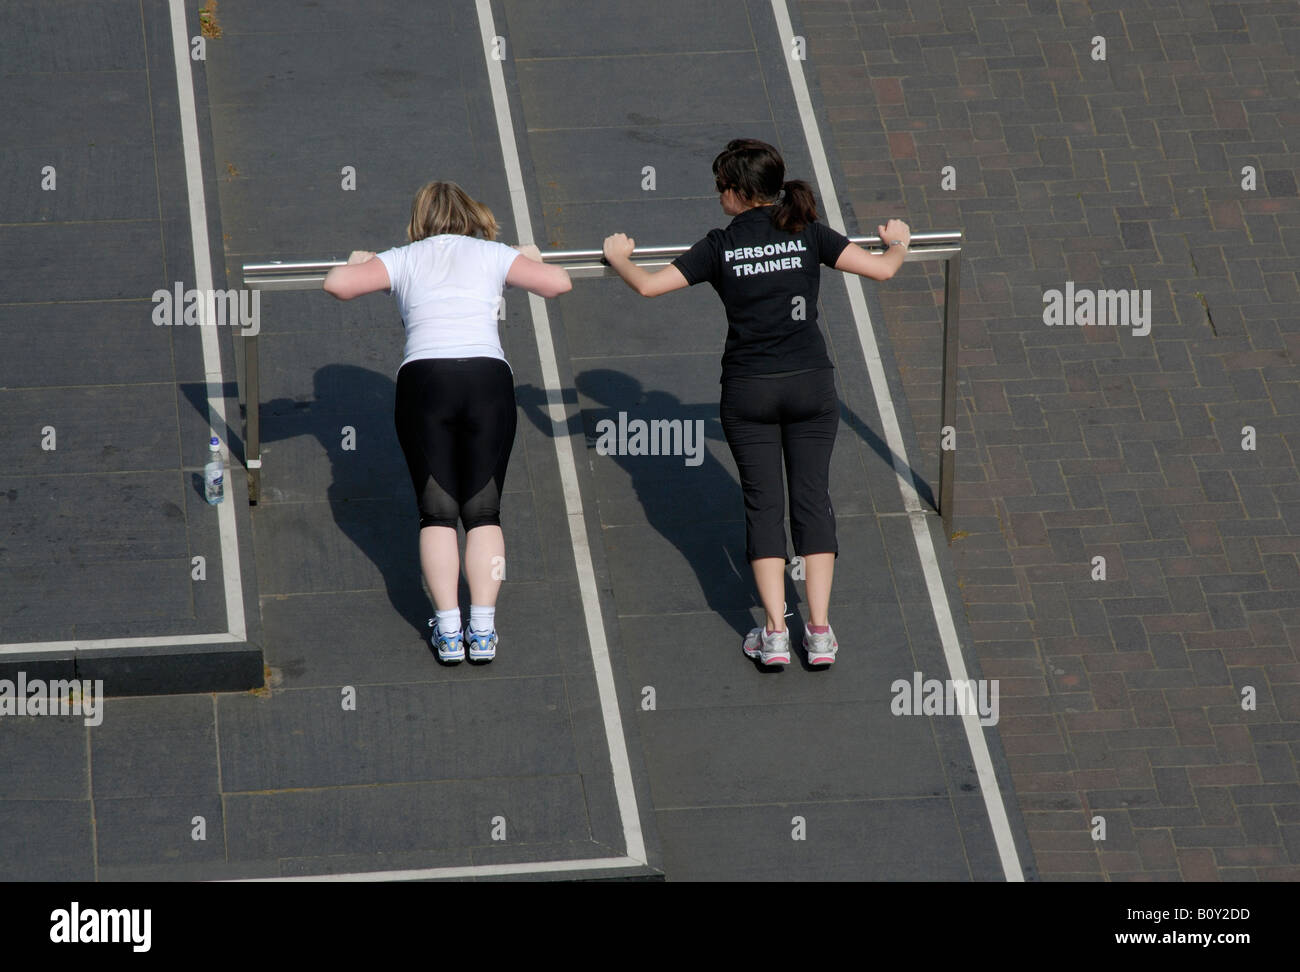 Personal trainer (indicated on the back of her t-shirt) and client doing push ups on raised bar, South Bank, London, England Stock Photo